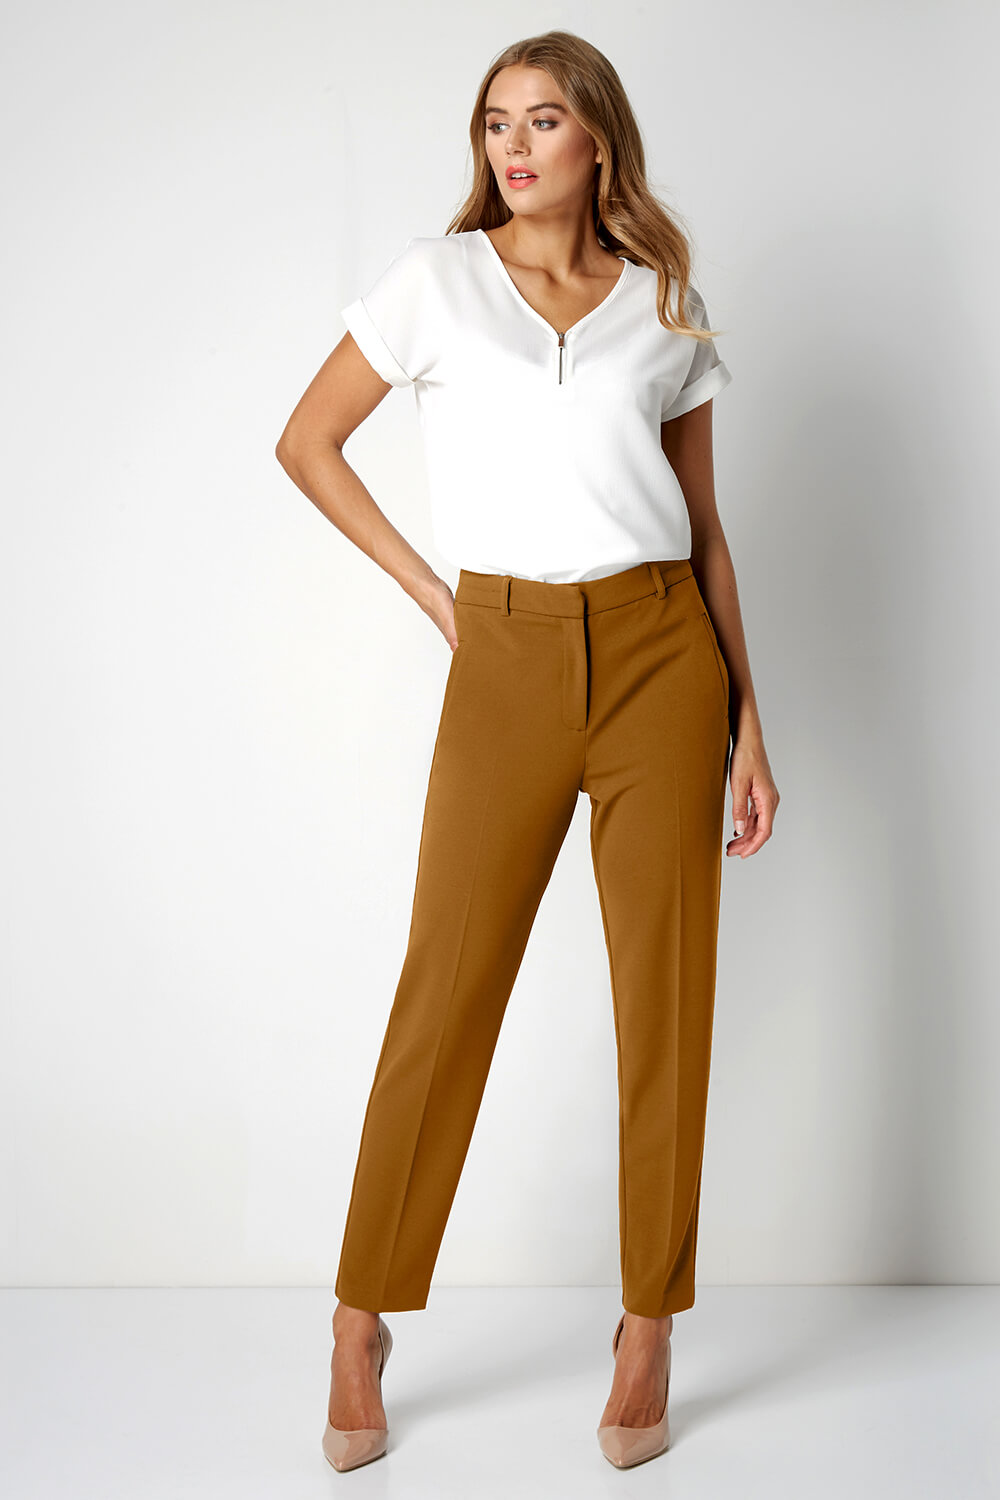 Camel Pants for Women  Up to 70 off  Lyst